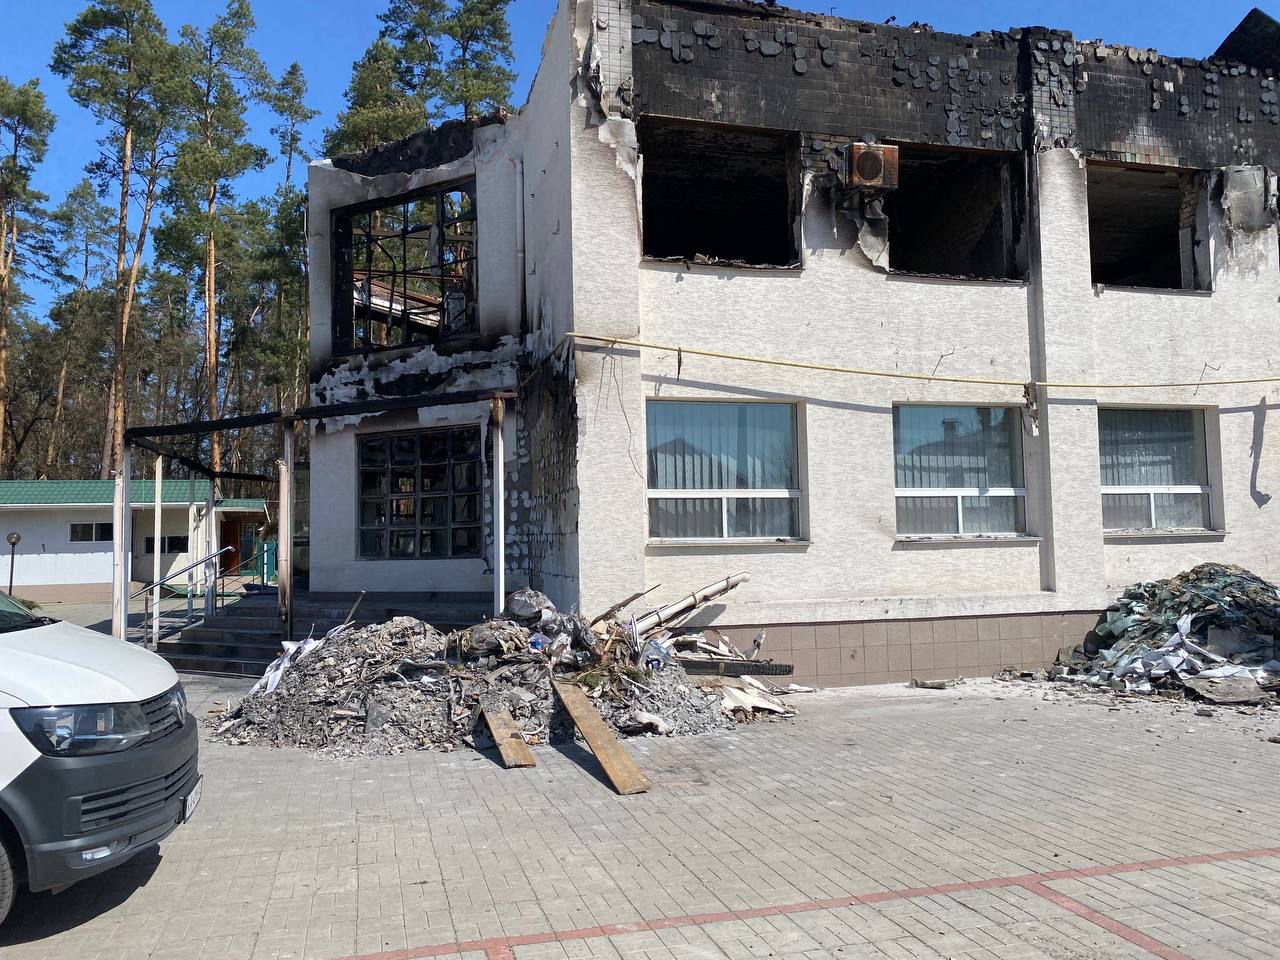 Irpen Seminary was hit by 50 mortar rounds.